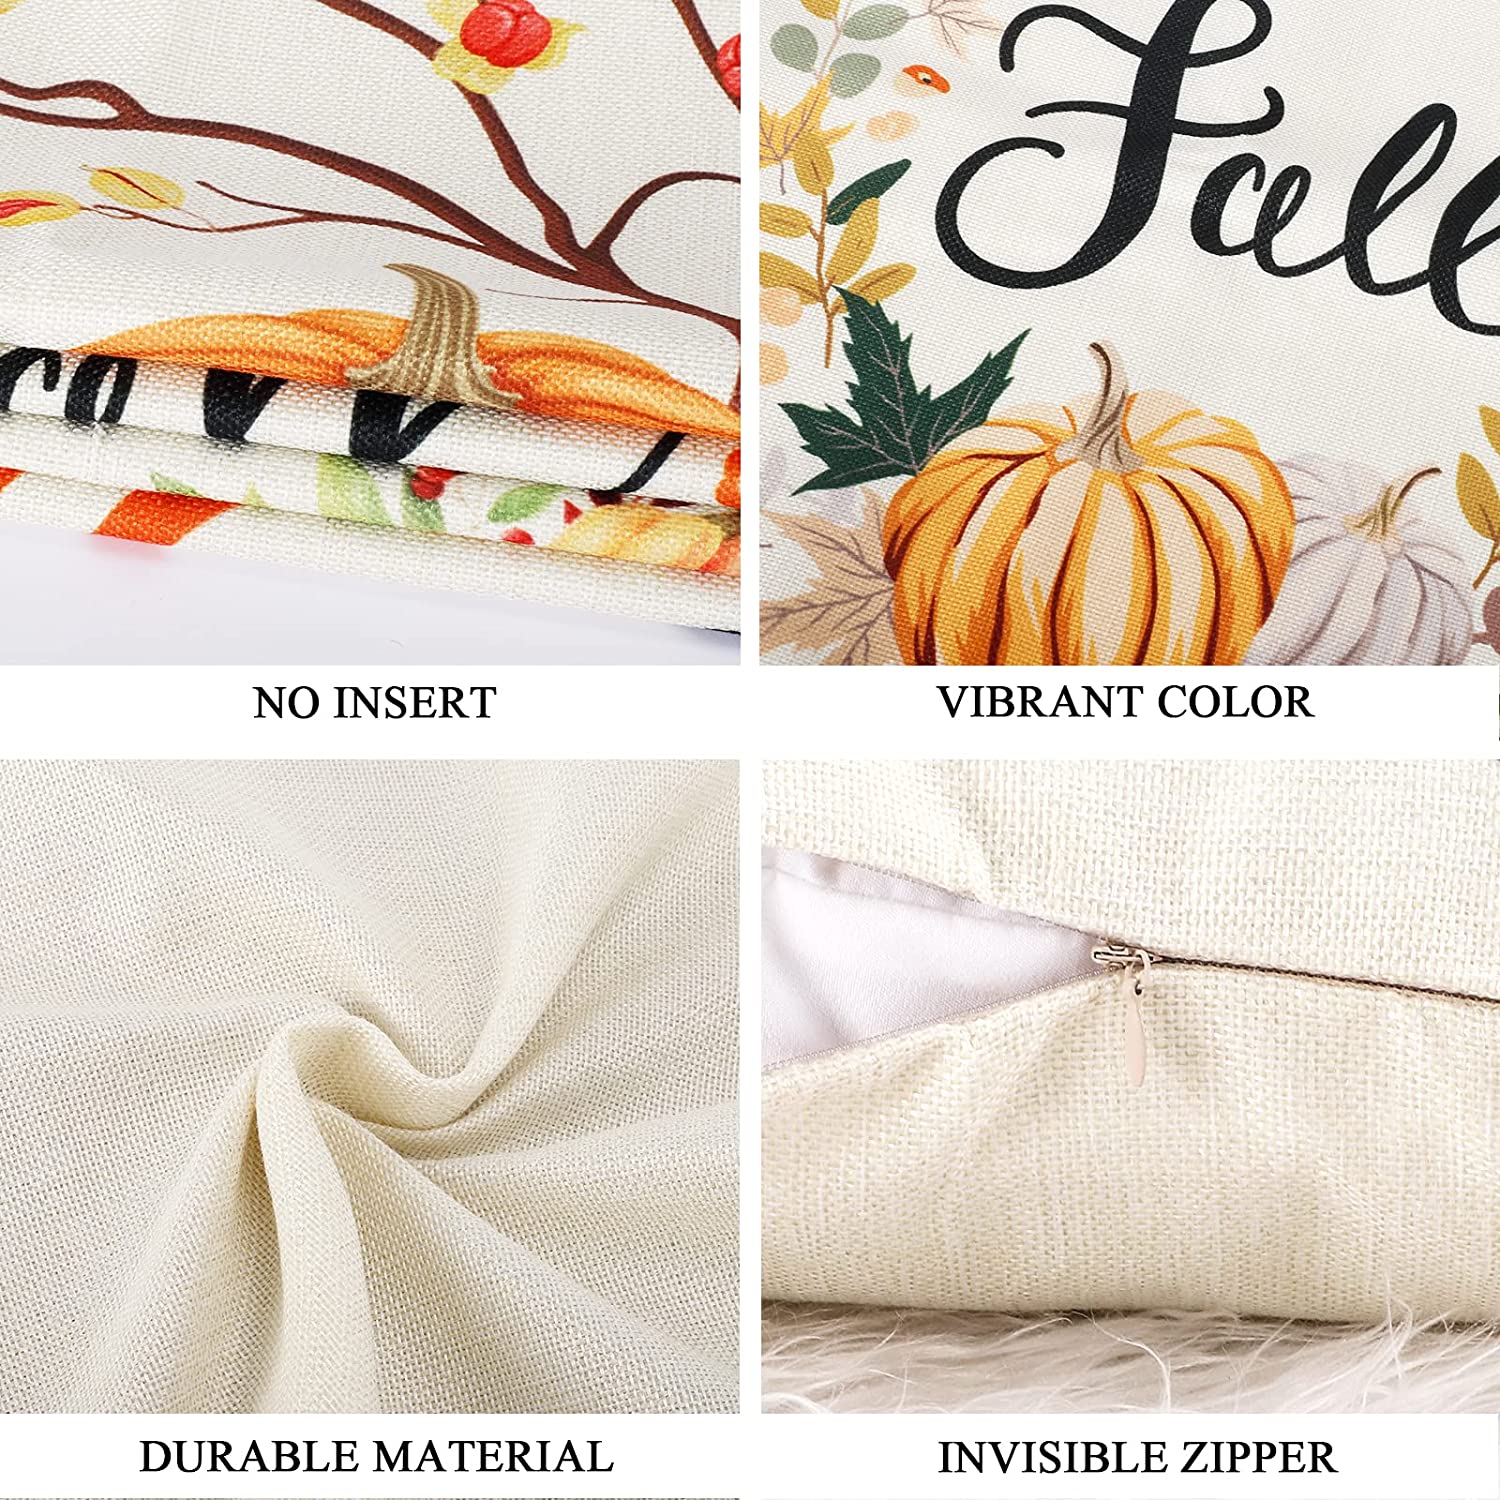 Fall Pillow Covers Set